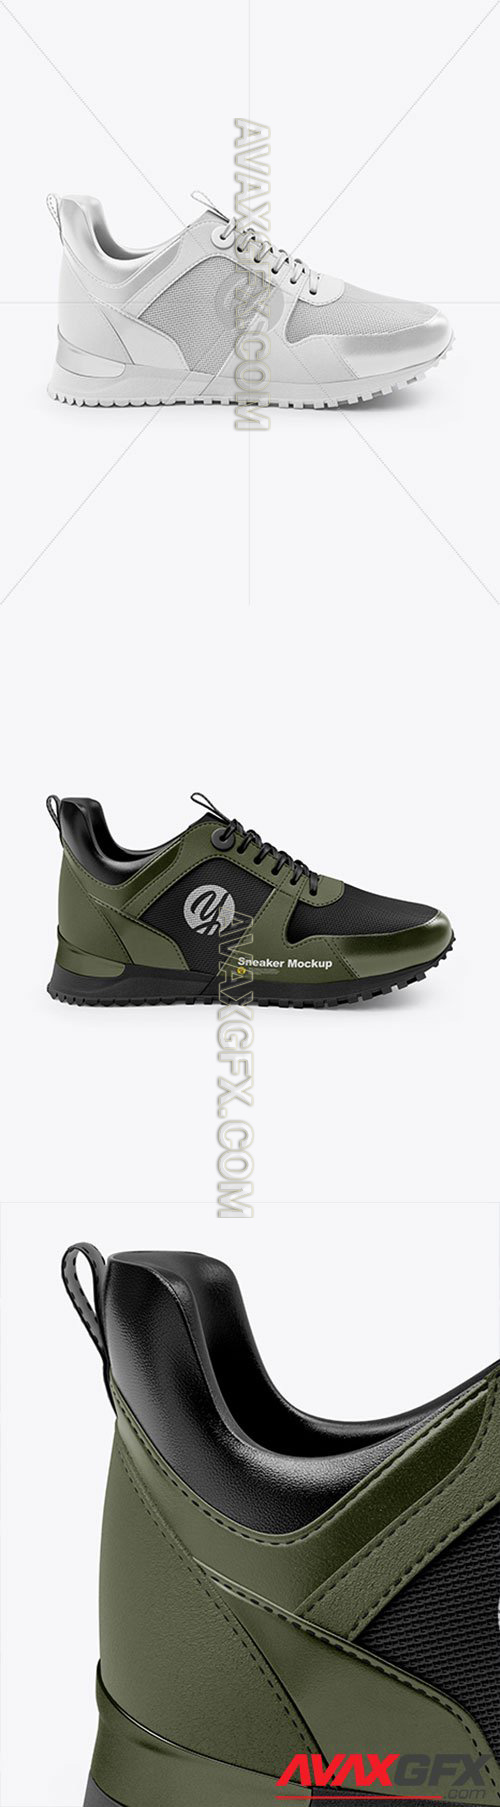 Sneaker Mockup - Right Side View 26441